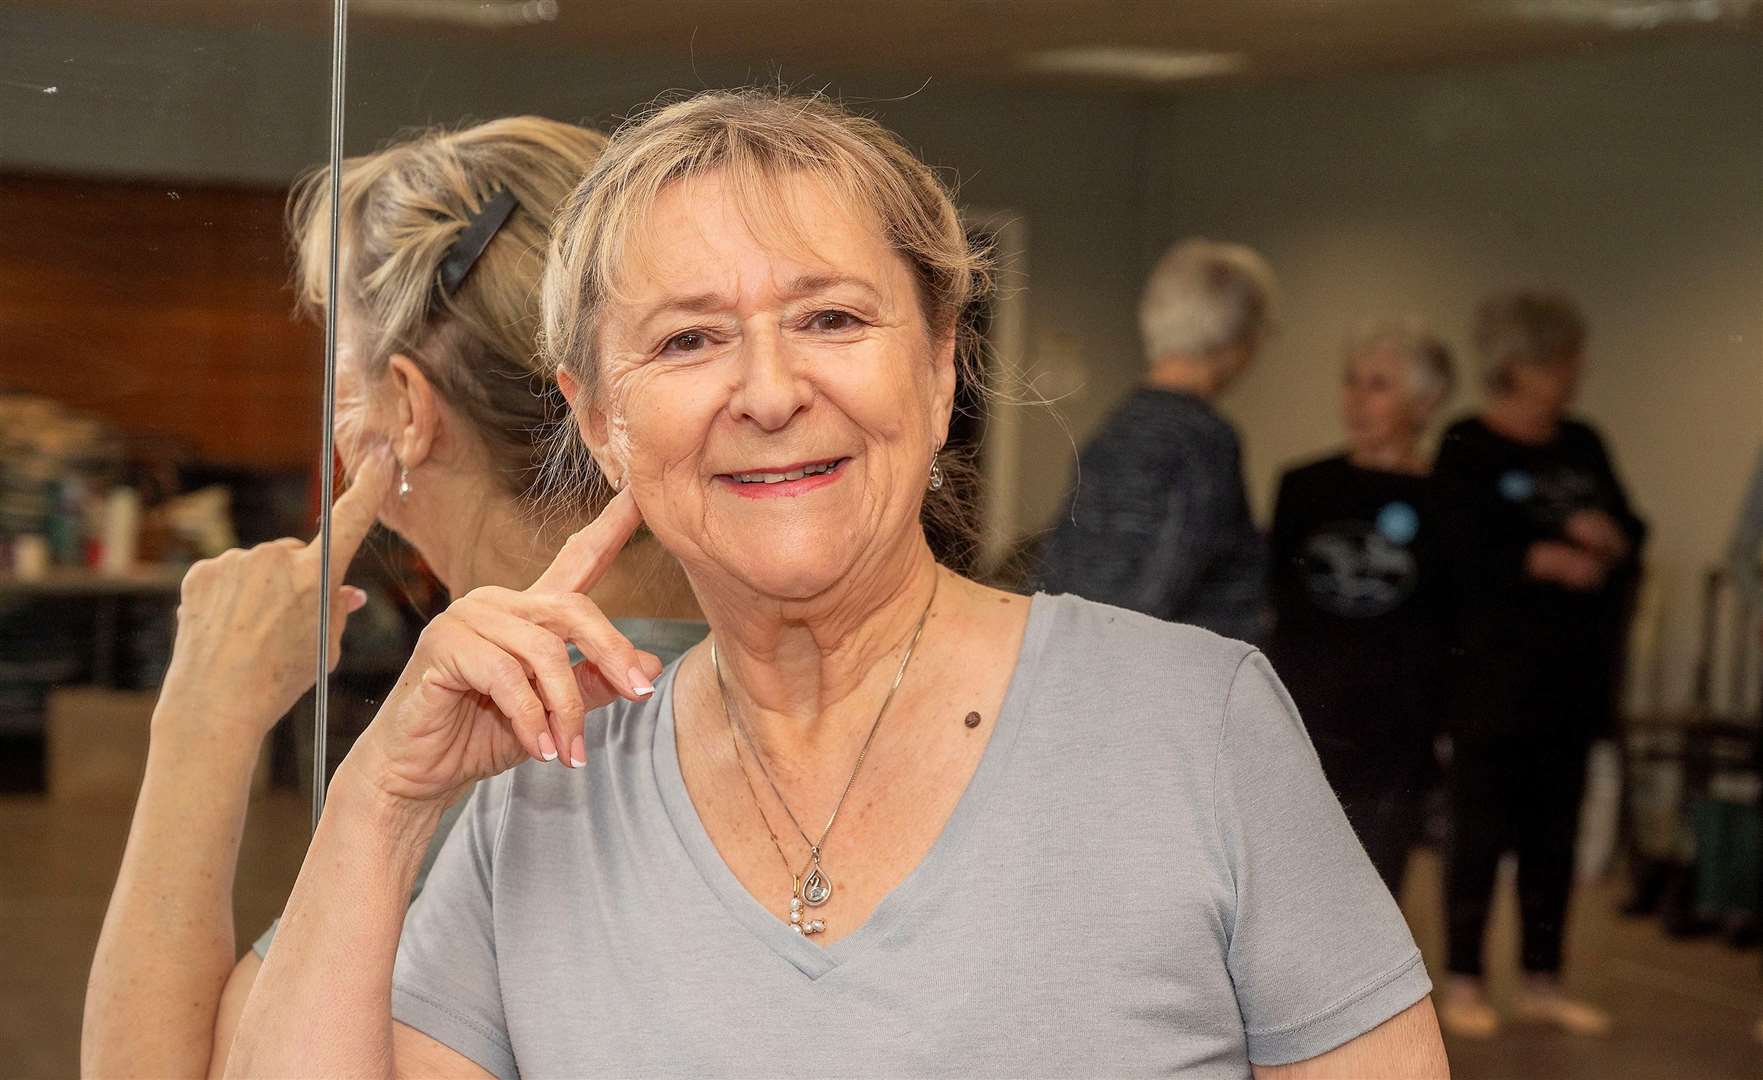 Ballet teacher Sue Hewgill Peterson who runs Silver Swans classes in Sudbury. Picture by Mark Westley